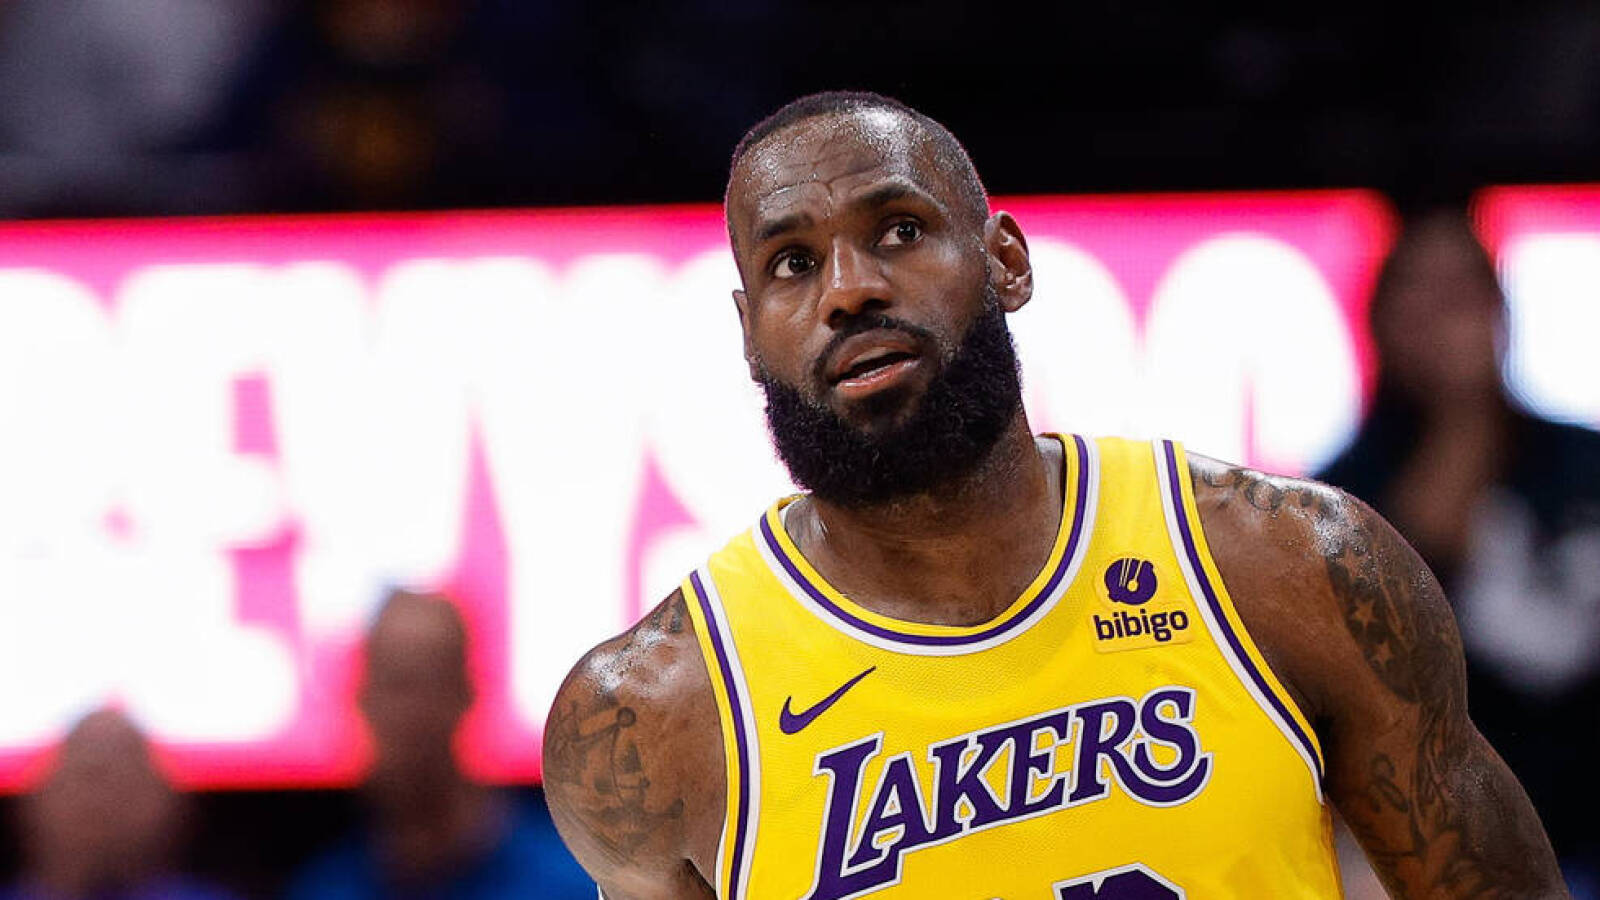 LeBron James takes to social media to address rumors about Lakers future